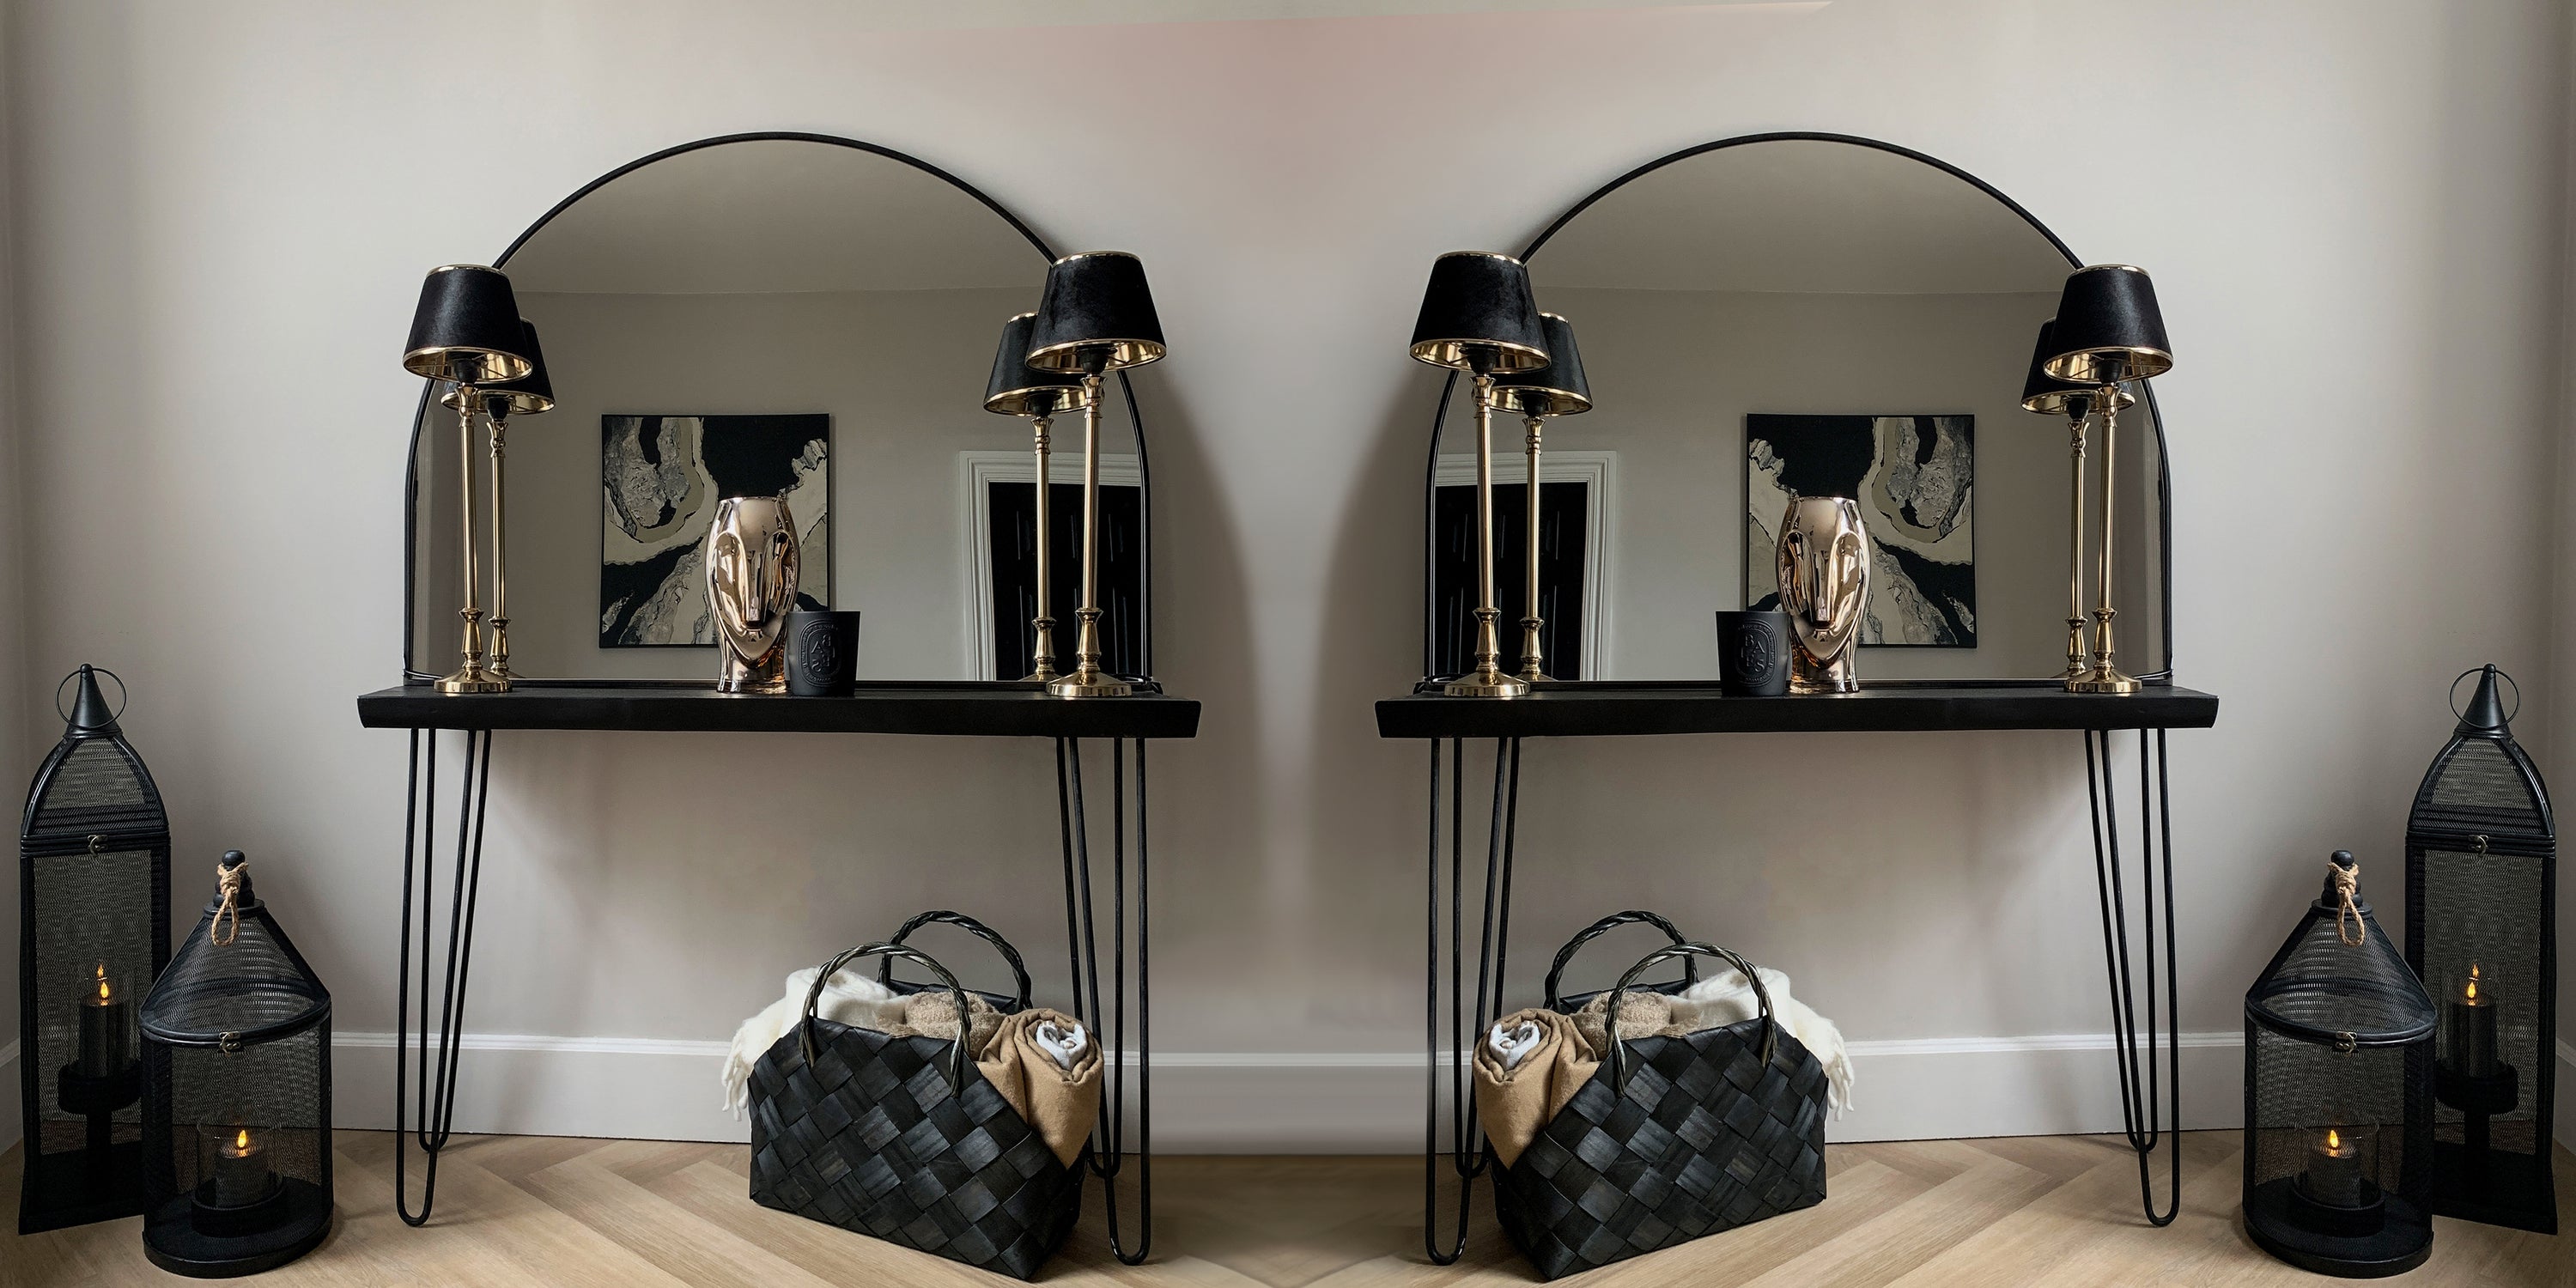 Two arched over mantle mirrors in an aesthetic setting